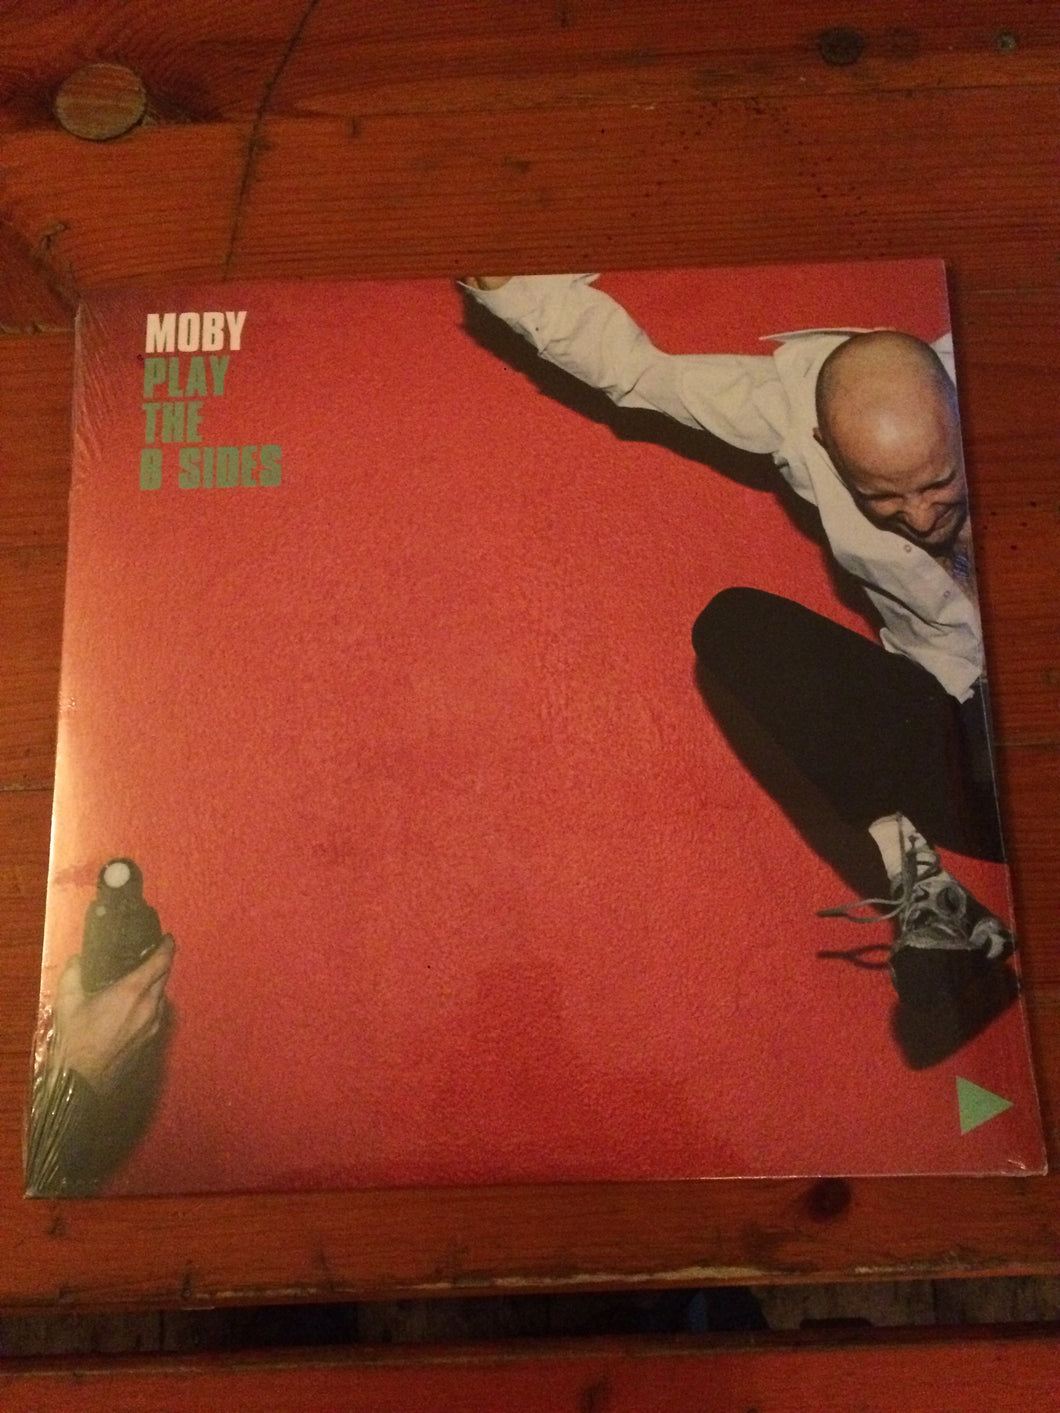 Moby - Play The B Sides